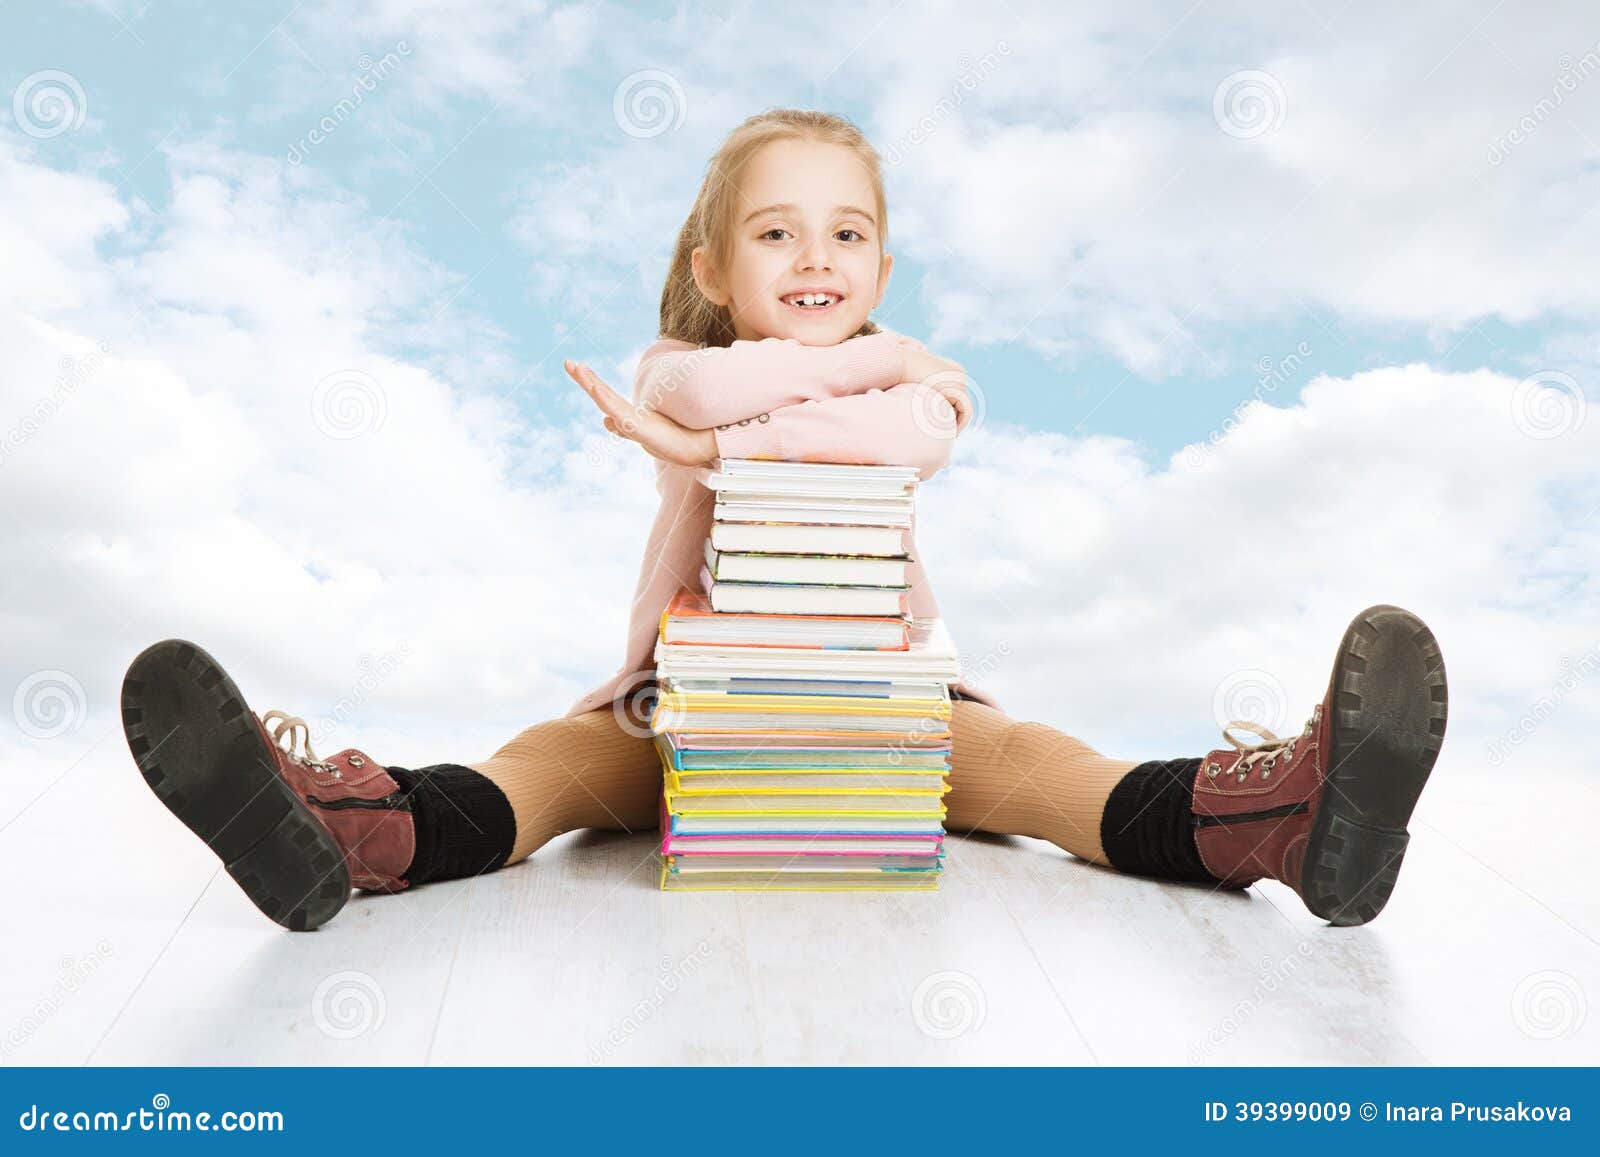 School Girl And Books Stack. Smiling Happy Child Pupil Stock Photo - Image: 393990091300 x 957